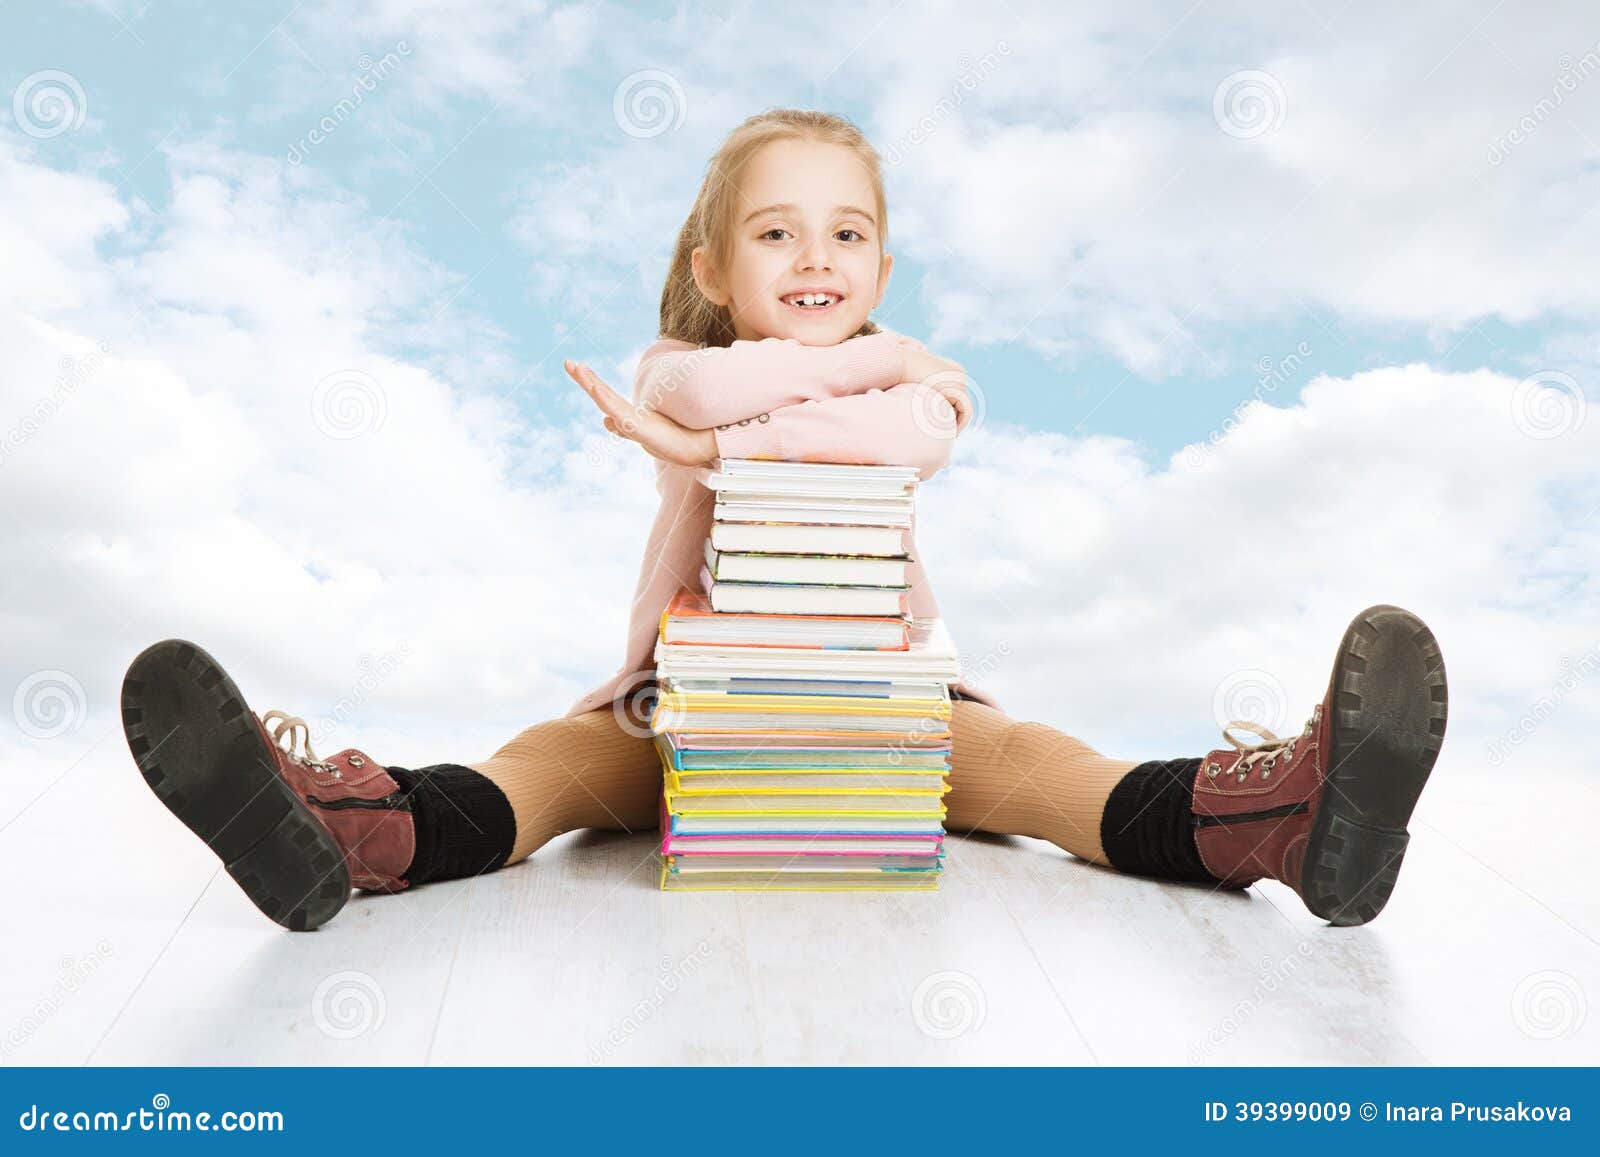 School Girl And Books Stack. Smiling Happy Child Pupil Stock Photo - Image: 393990091300 x 957